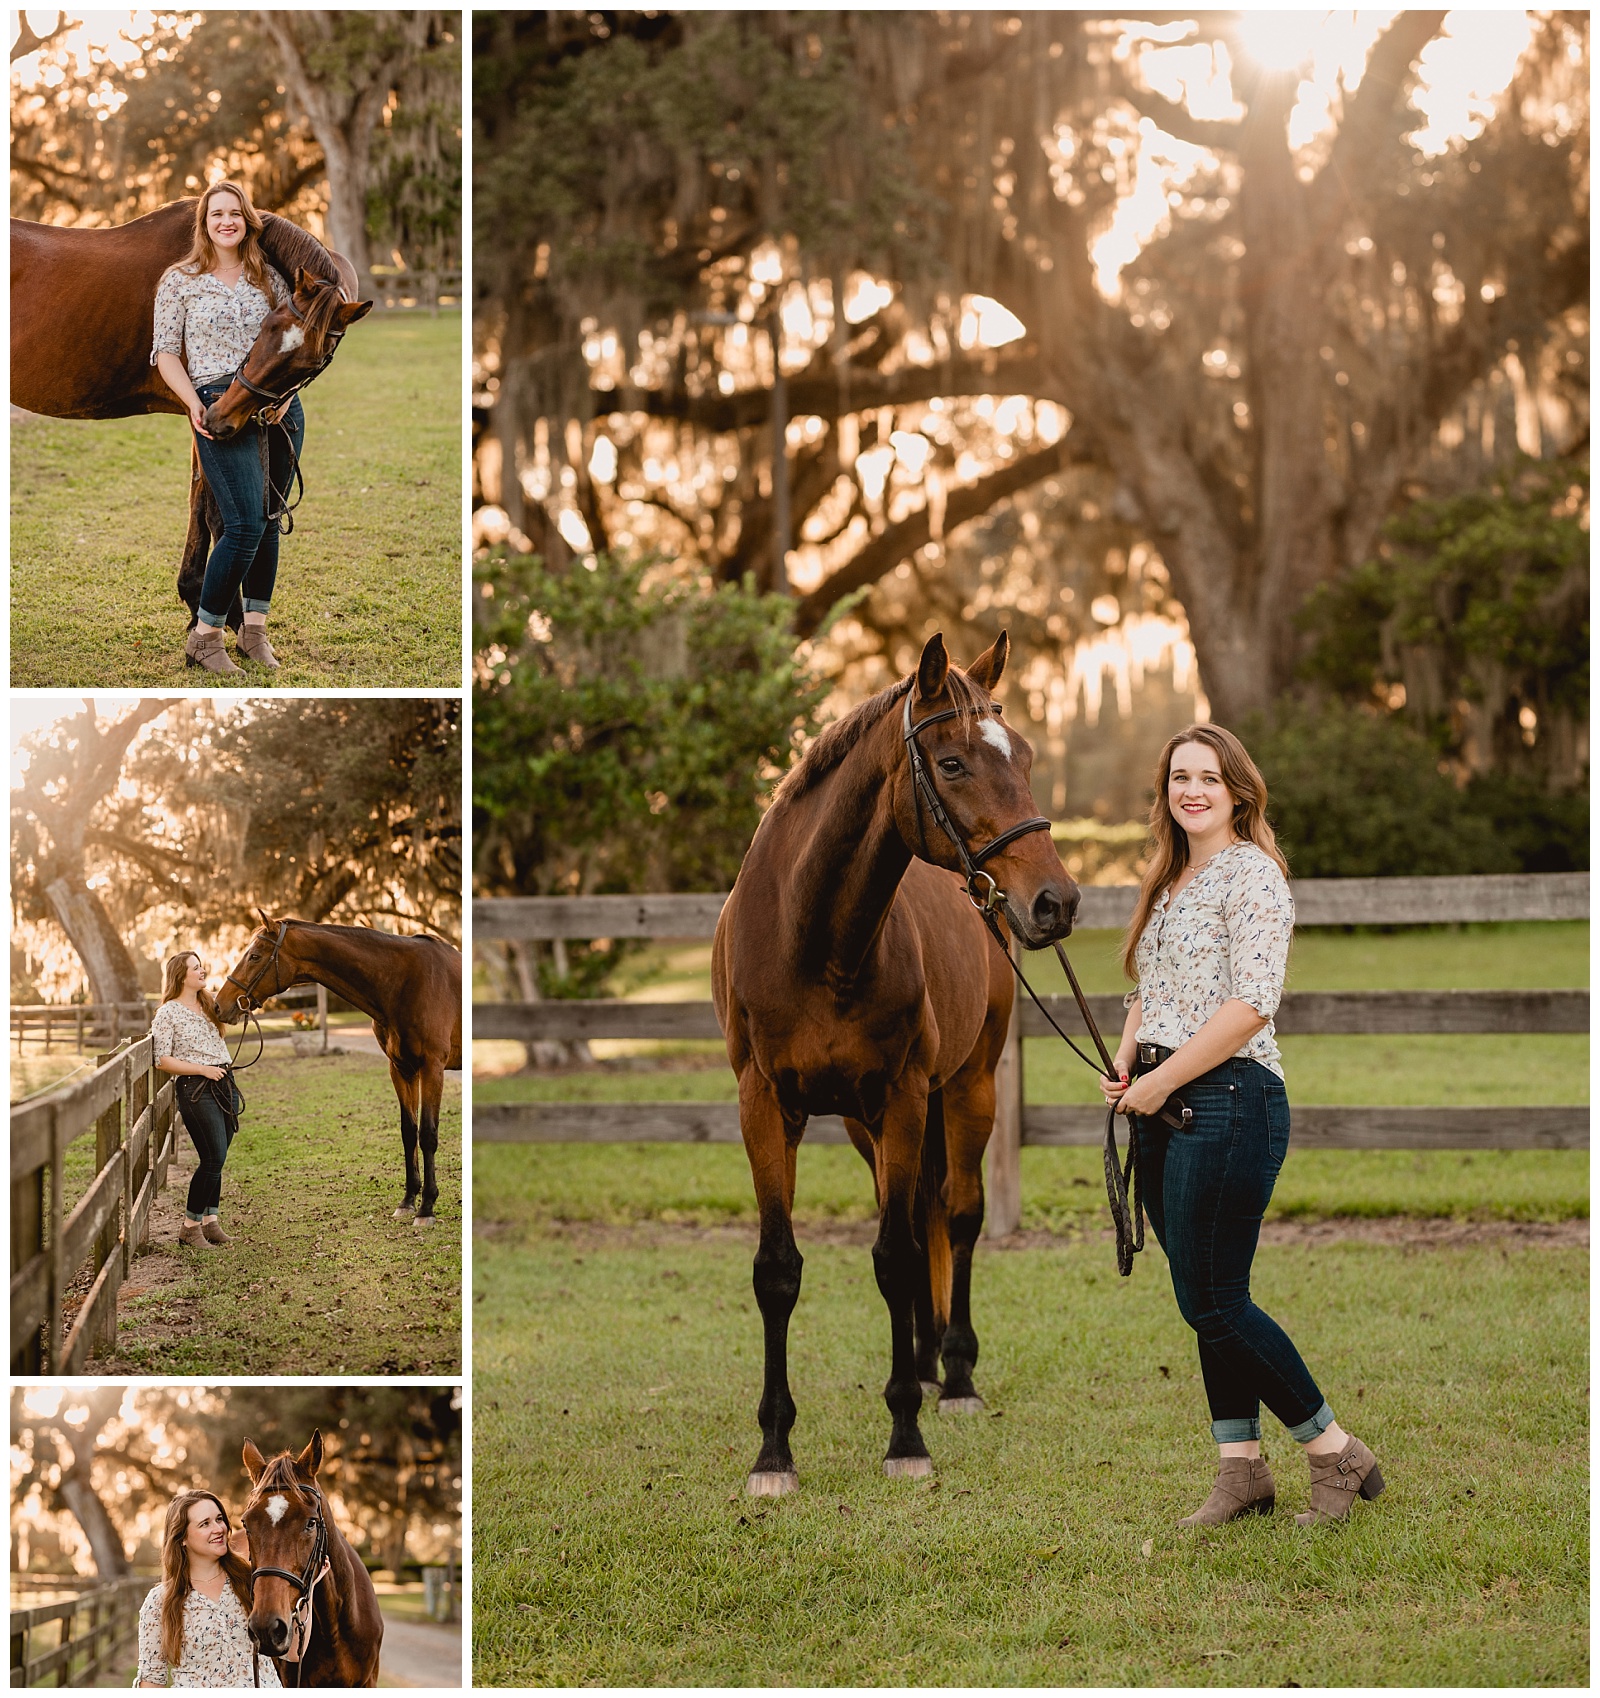 Photos of a girl and her horse during the golden hour at Patchuk Farm in Monticello, FL. Florida horse photographer